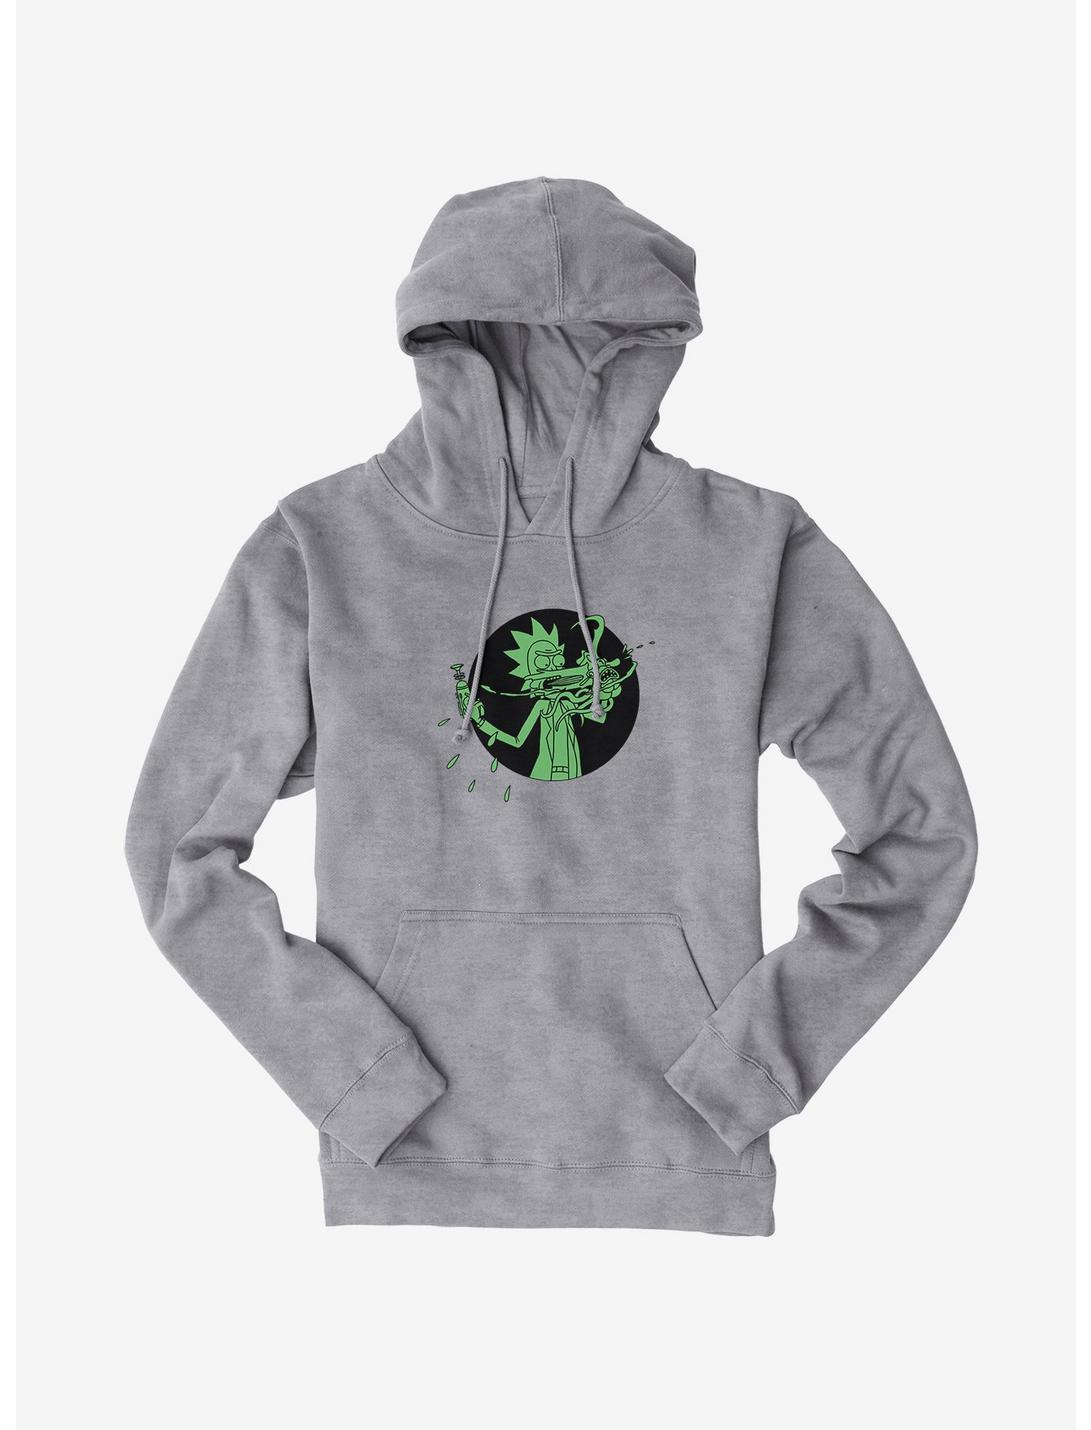 Rick And Morty Glorzo Removal Hoodie, , hi-res